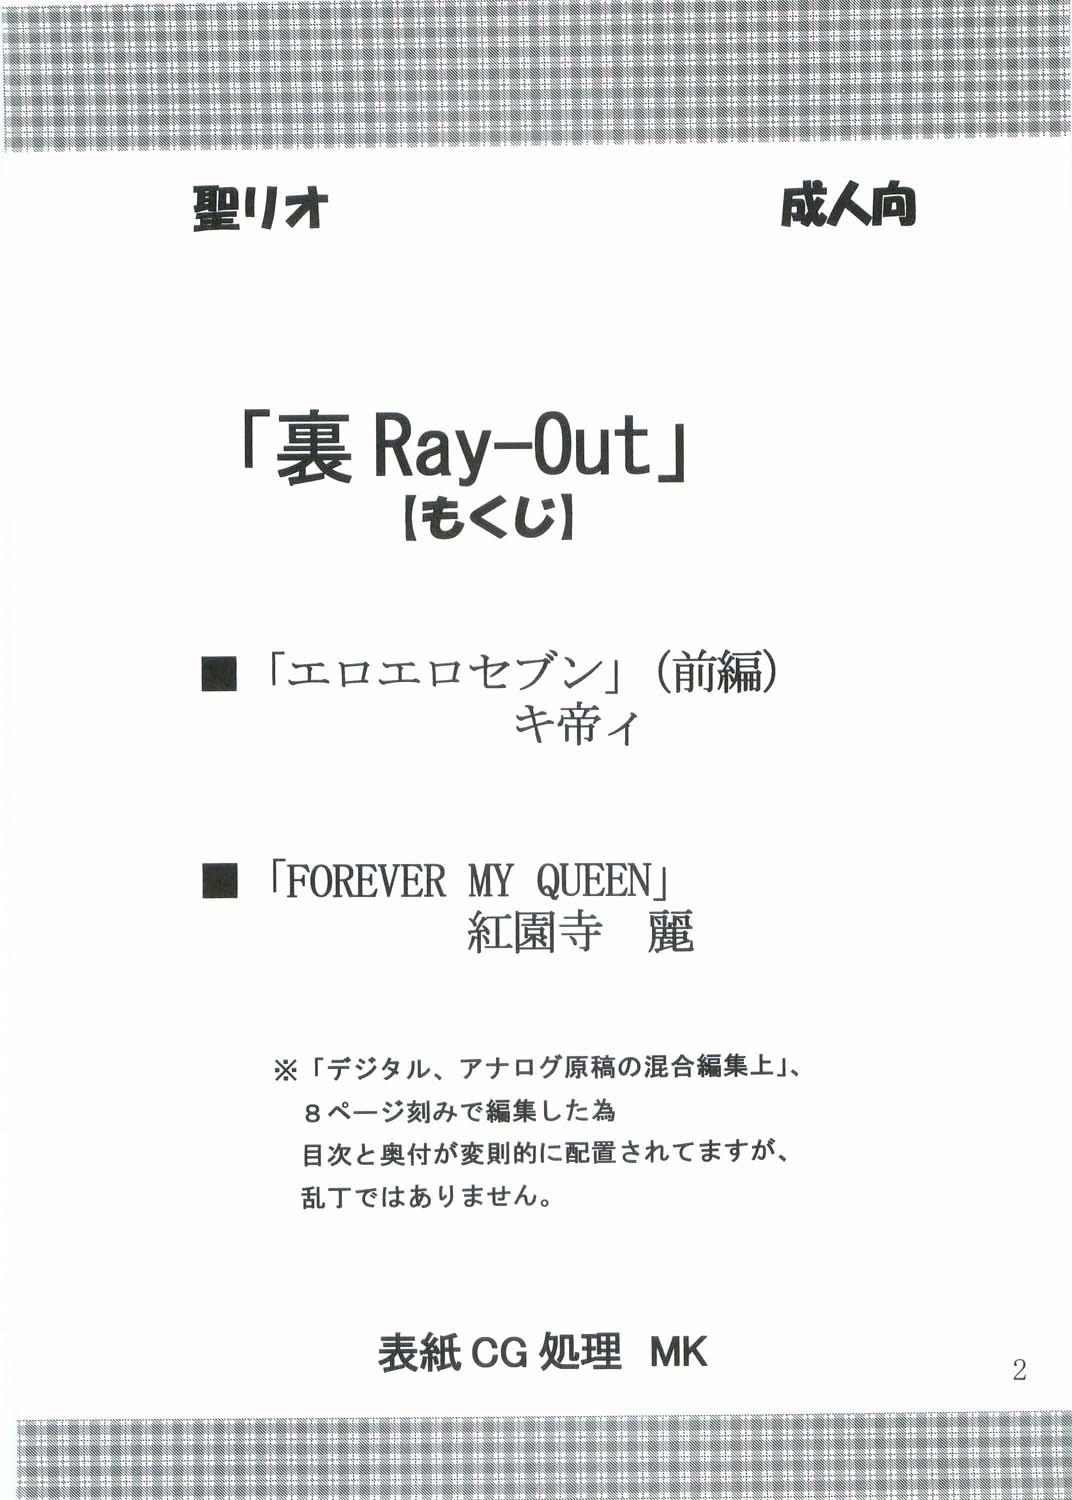 Finger Ura ray-out - Eureka 7 Lolicon - Page 3